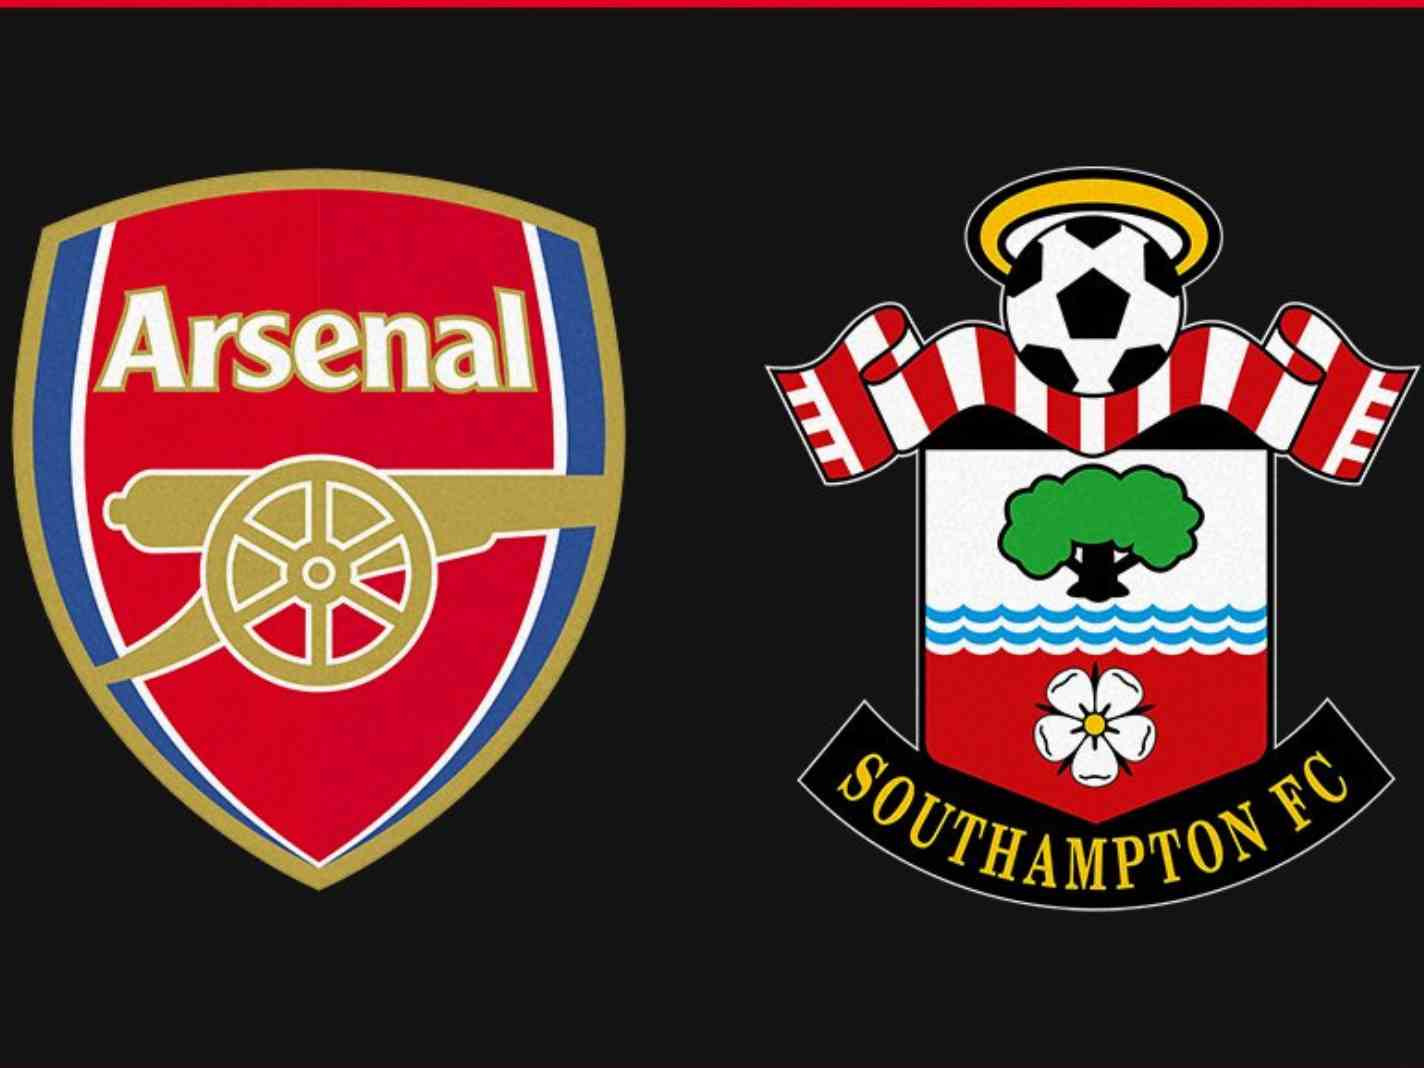 Latest Odds and Predictions for Arsenal vs Southampton